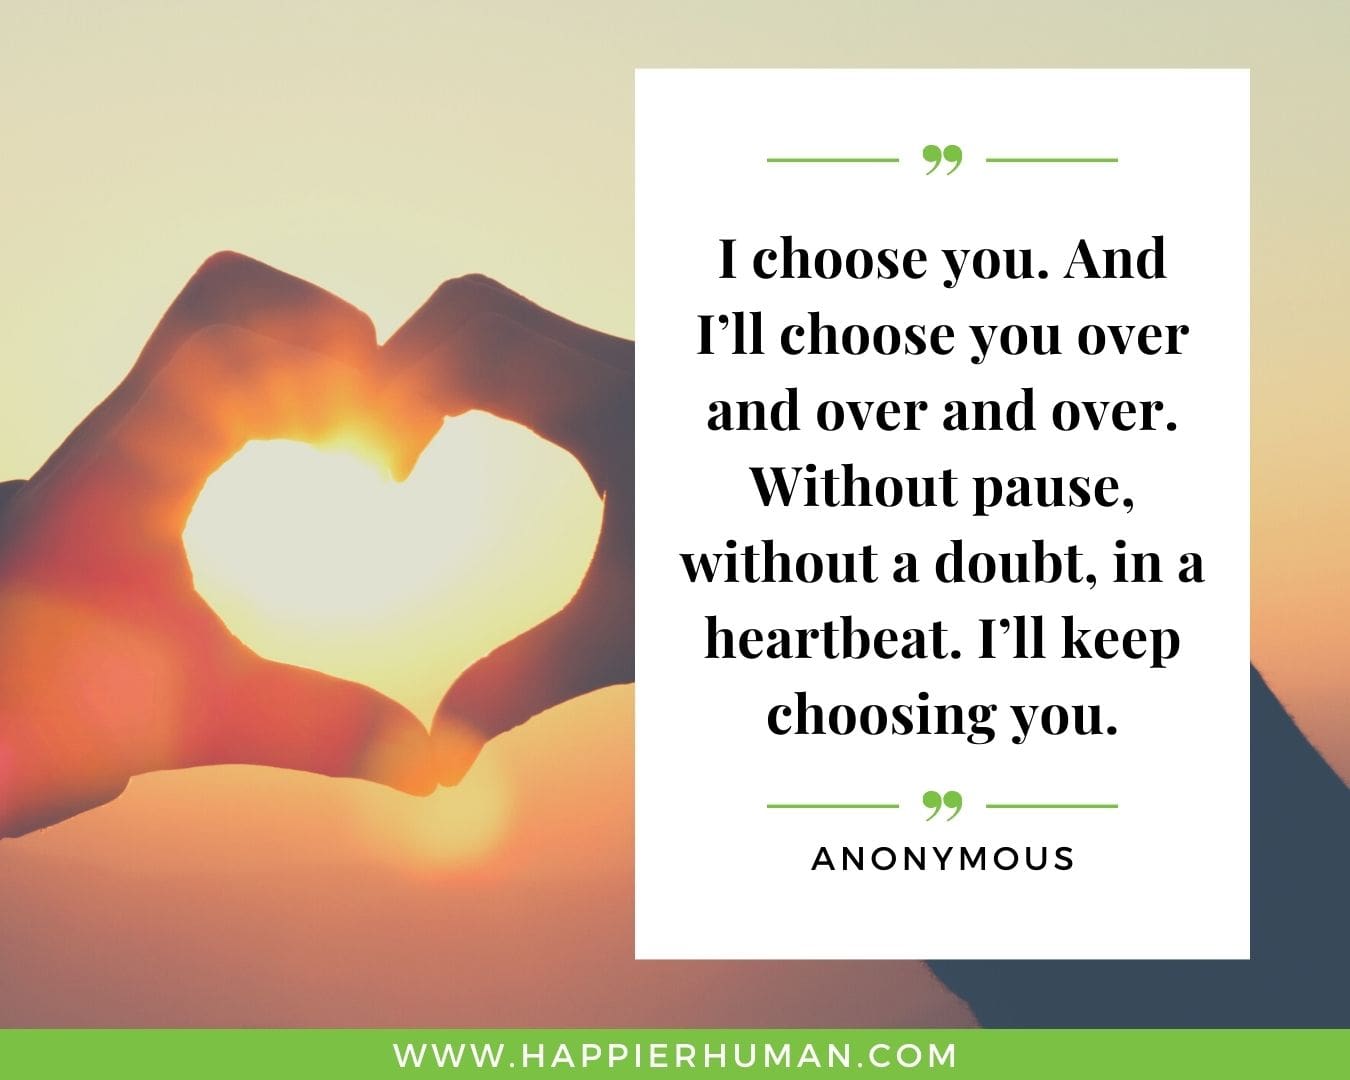 Love and Affection Quotes - “I choose you. And I’ll choose you over and over and over. Without pause, without a doubt, in a heartbeat. I’ll keep choosing you.”- Anonymous